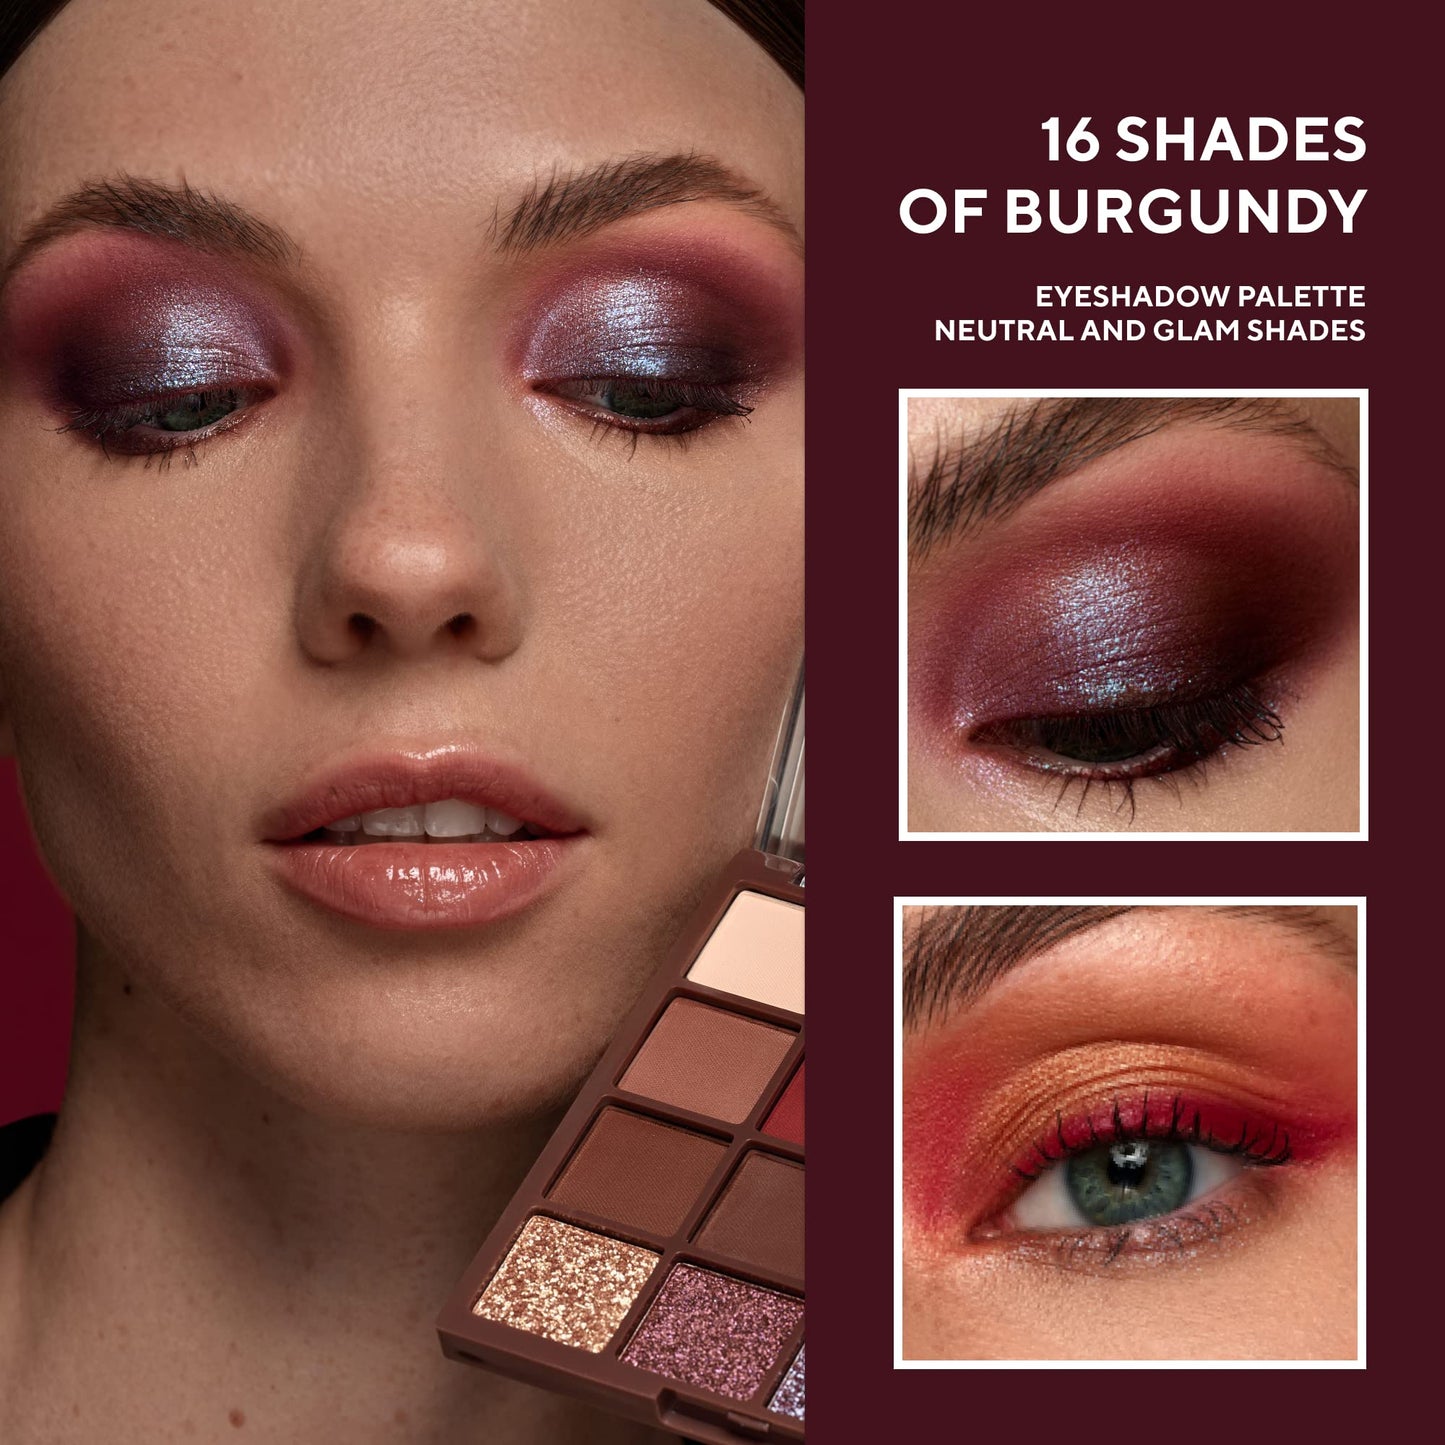 Lamel- 16 Shades of Burgundy- Eyeshadow Palette | Silky-smooth, creamy eyeshadows | Rich pigment |Does not crease or smudge |Perfect for casual and dramatic looks | Ultra blendable formula | 16 gm